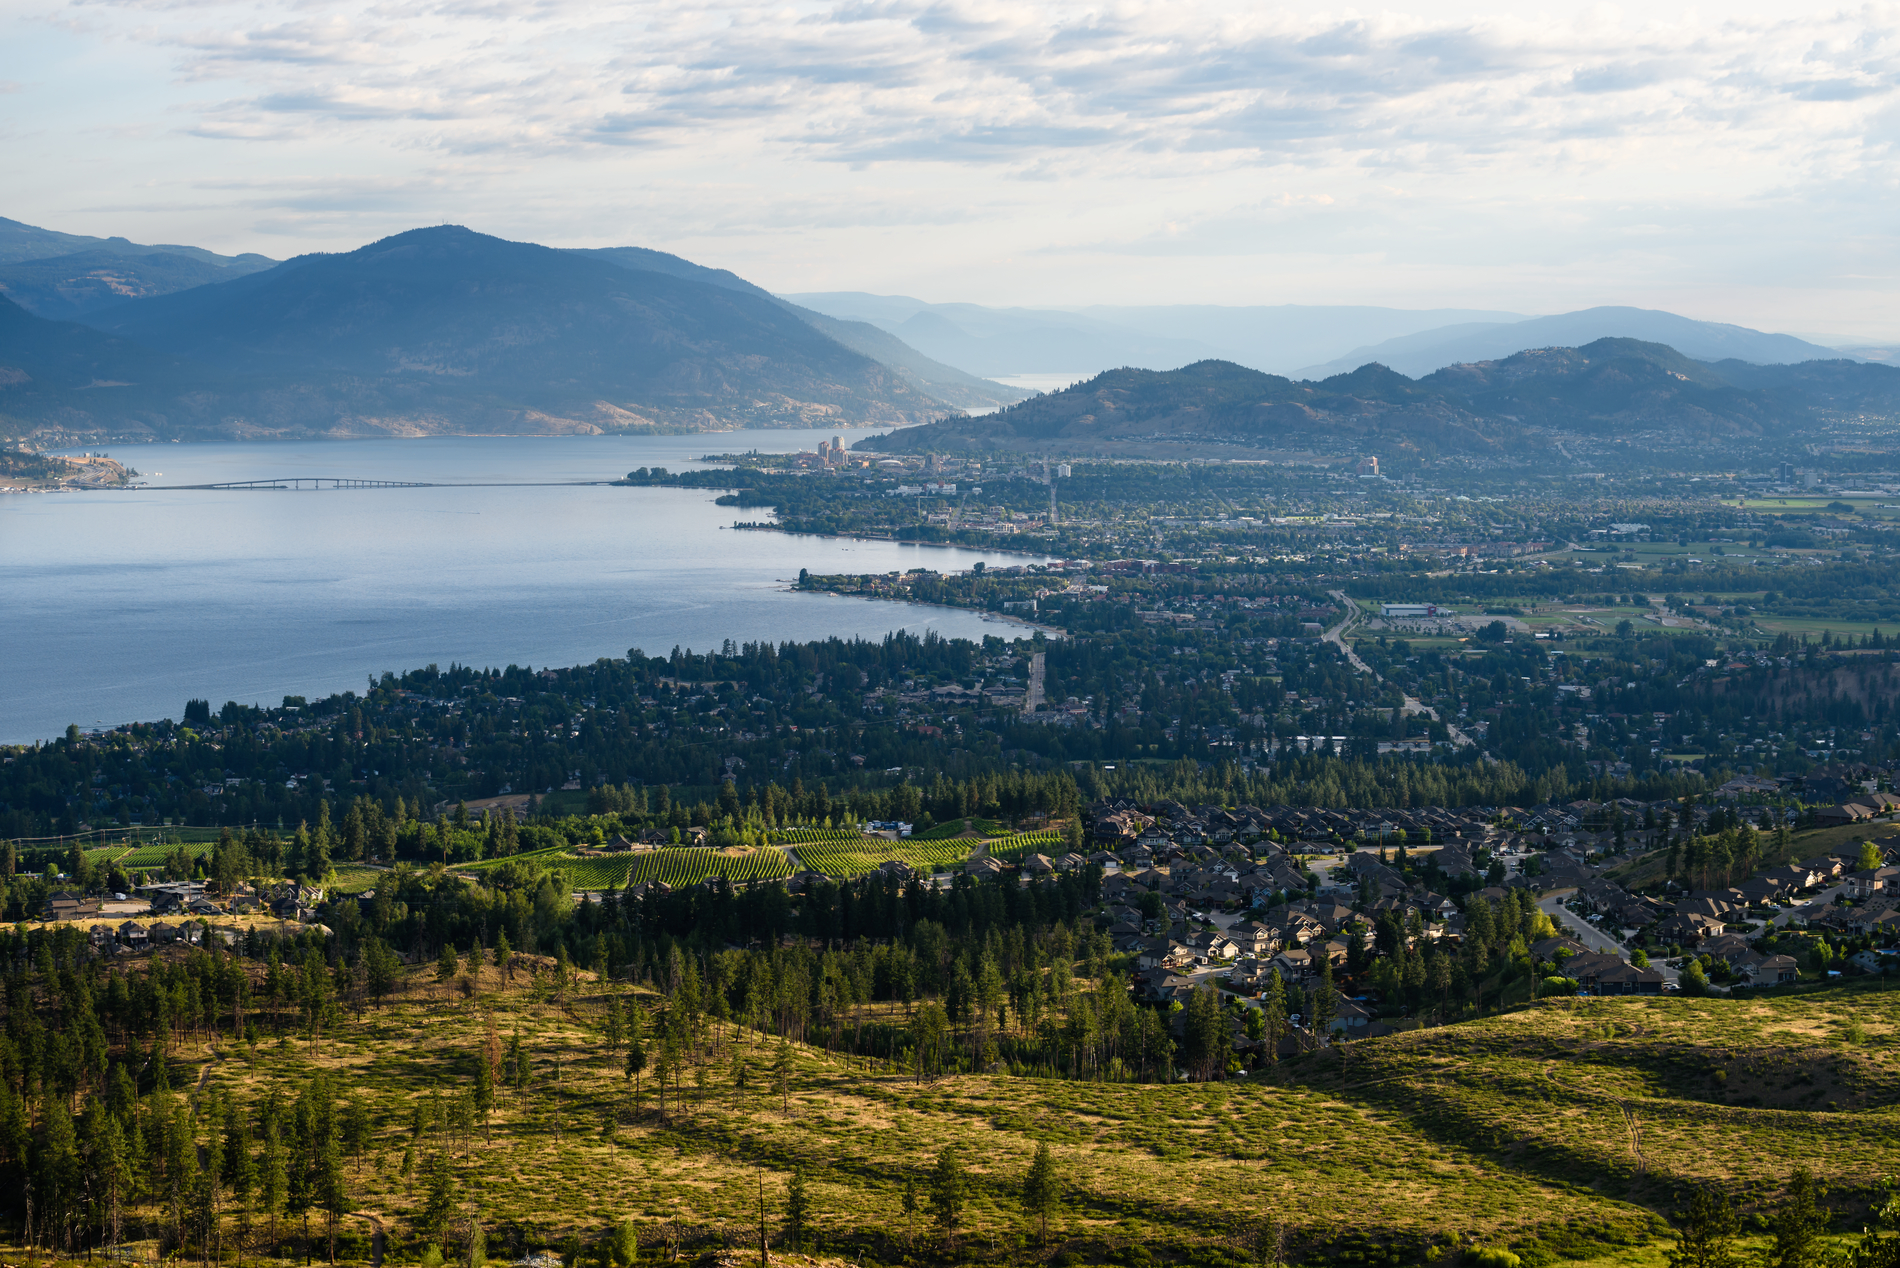 The town of Kelowna in the as seen surrounding Okanagan lake. There are rolling hills of grass, vineyards and mountains in the distance.